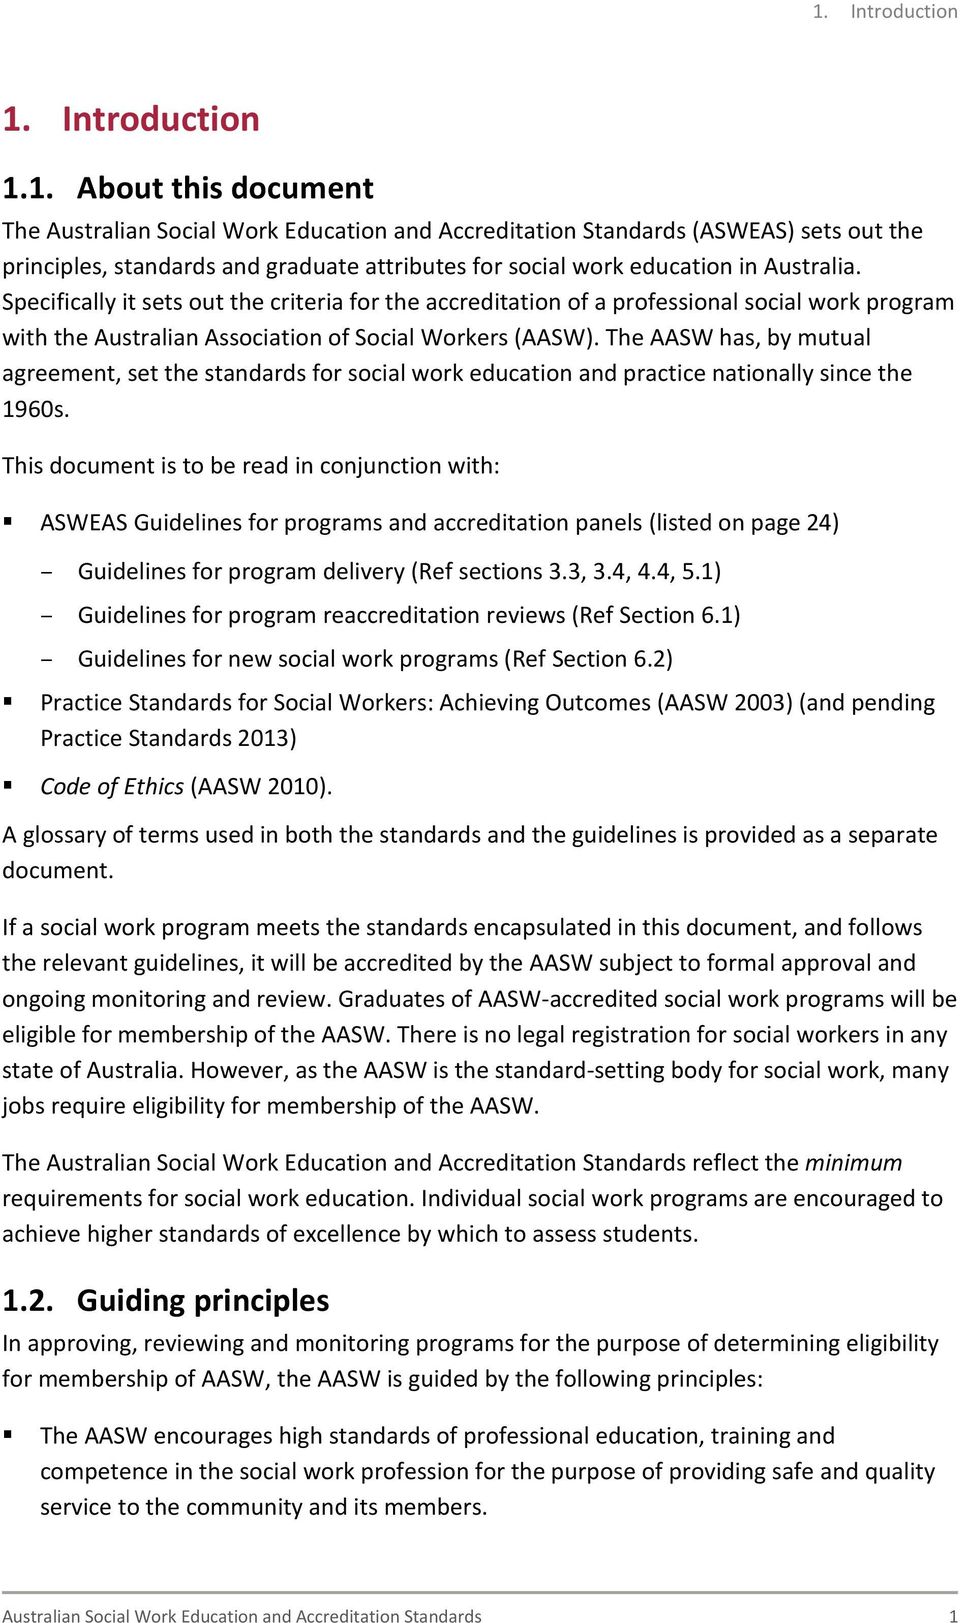 The AASW has, by mutual agreement, set the standards for social work education and practice nationally since the 1960s.